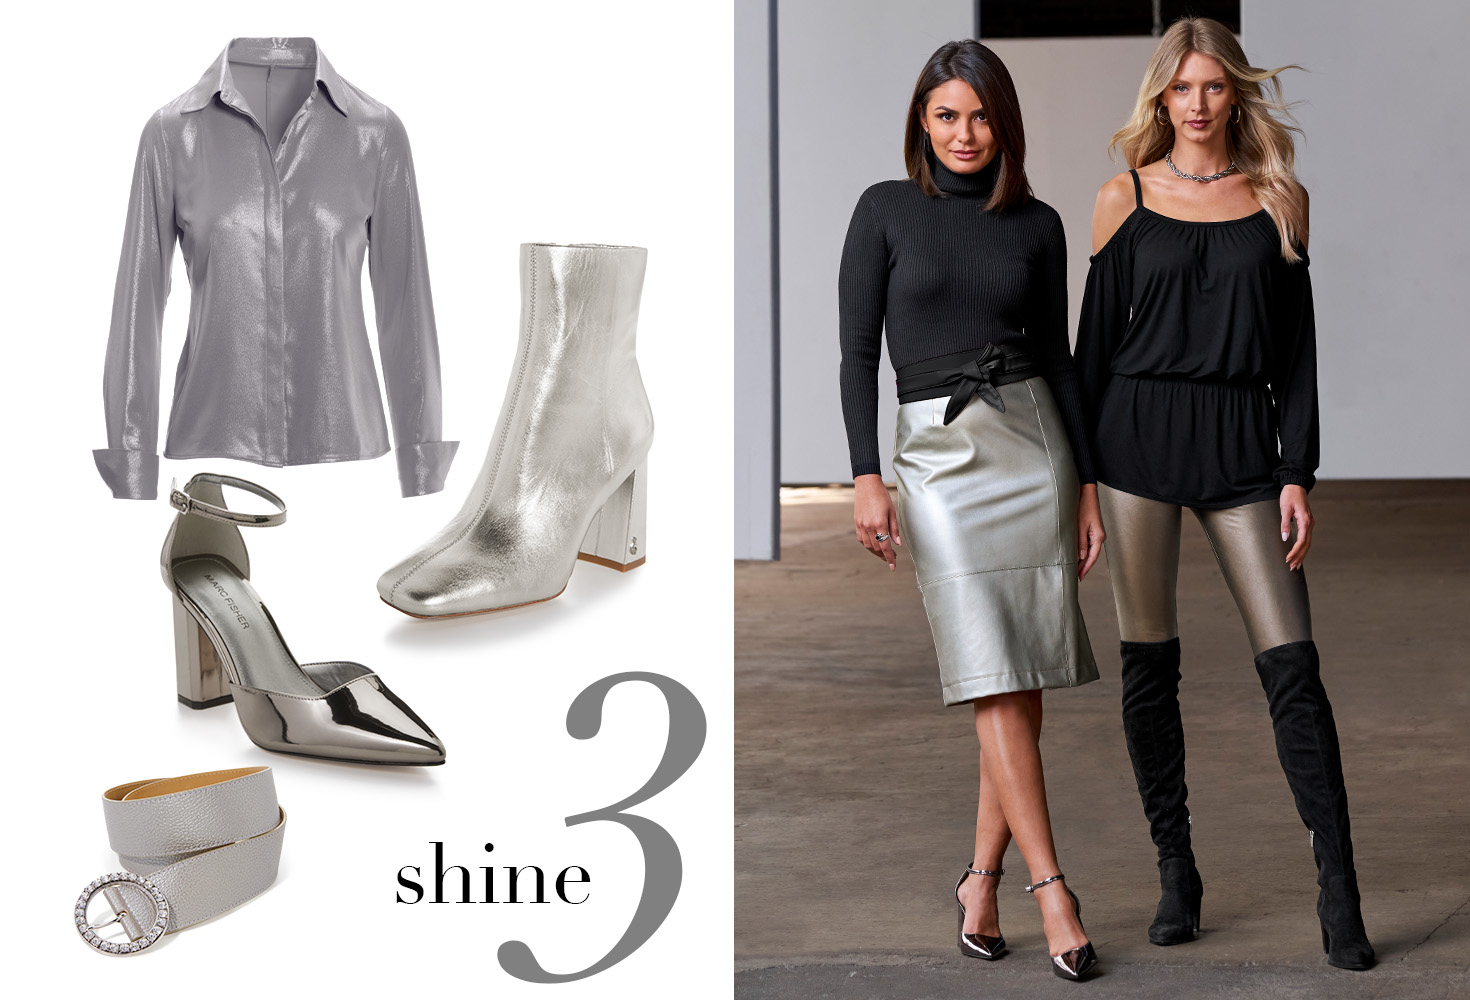 Photo includes sophia metallic button up, silver square toe booties, metallic strappy heel and grey and embellished belt. Model 1 wearing high neck black sweater with metallic silver knee length skirt and wrap tie black belt.Model 2 wearing black cold shoulder romper with metallic aspen leggings and knee high black boots.